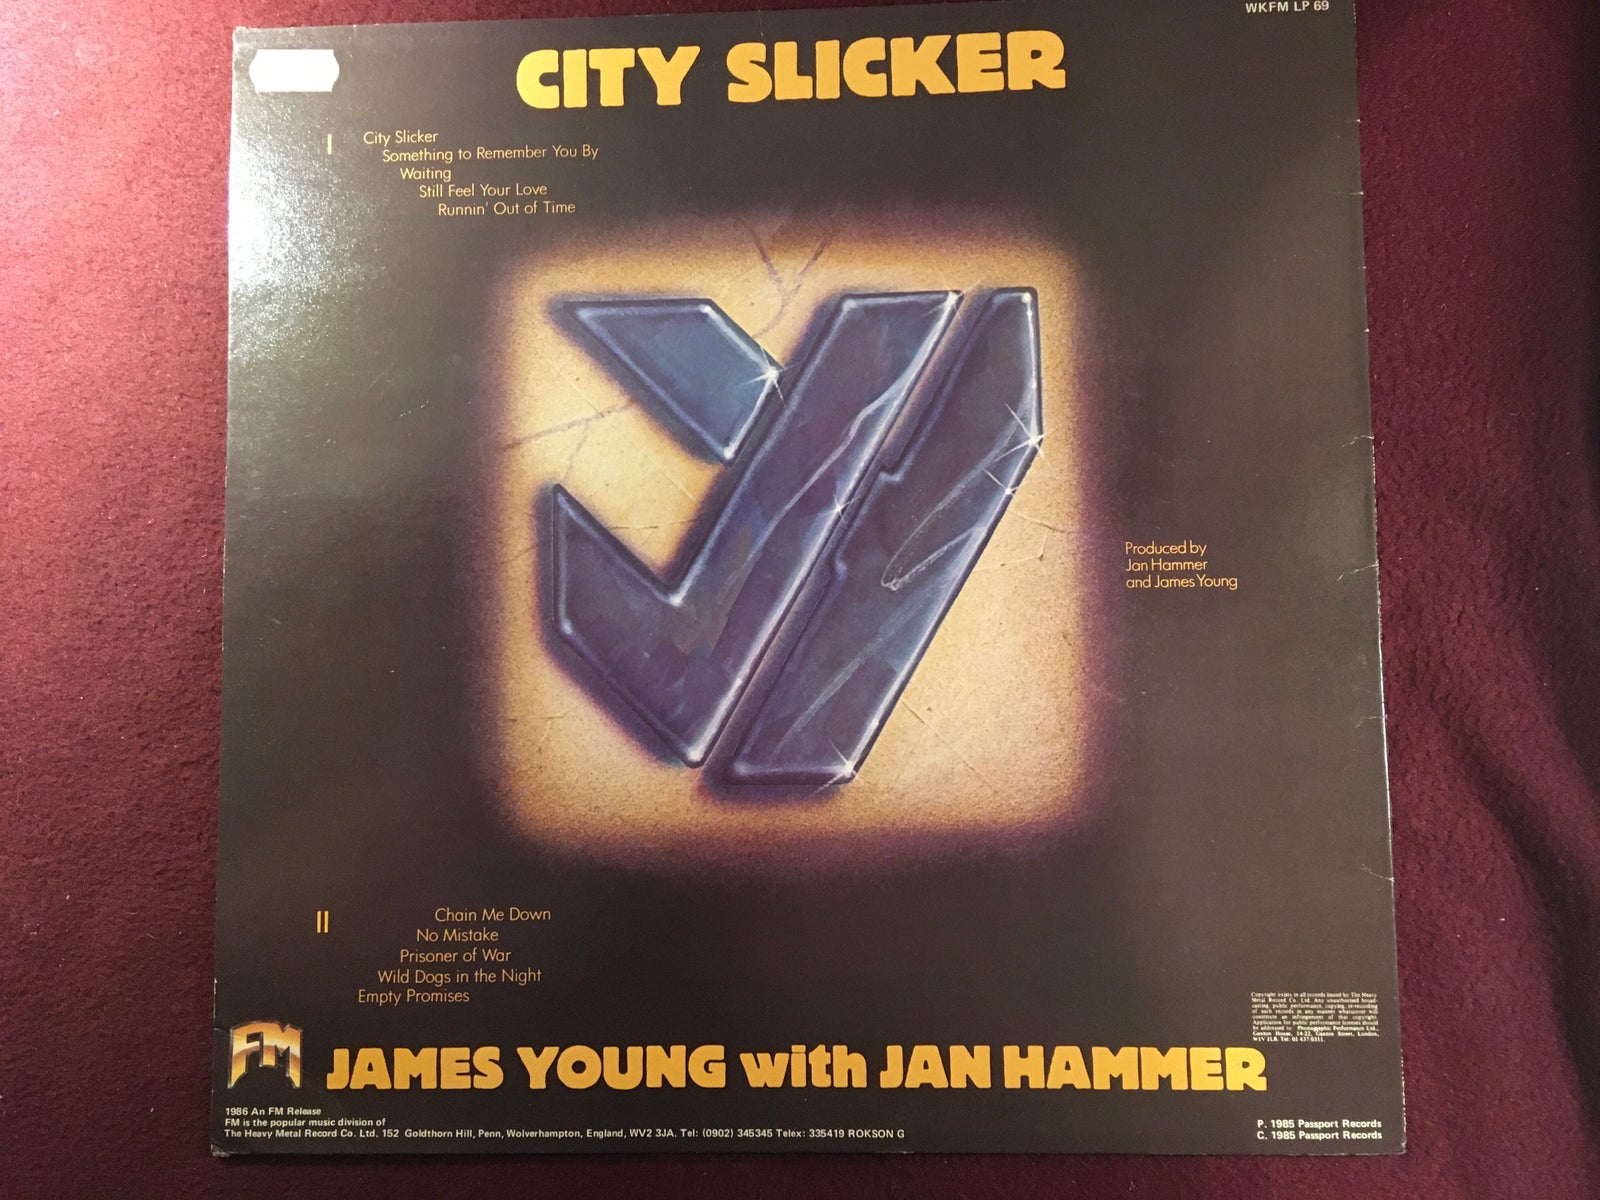 LP, James Young with Jan Hammer, JY / City Slicker